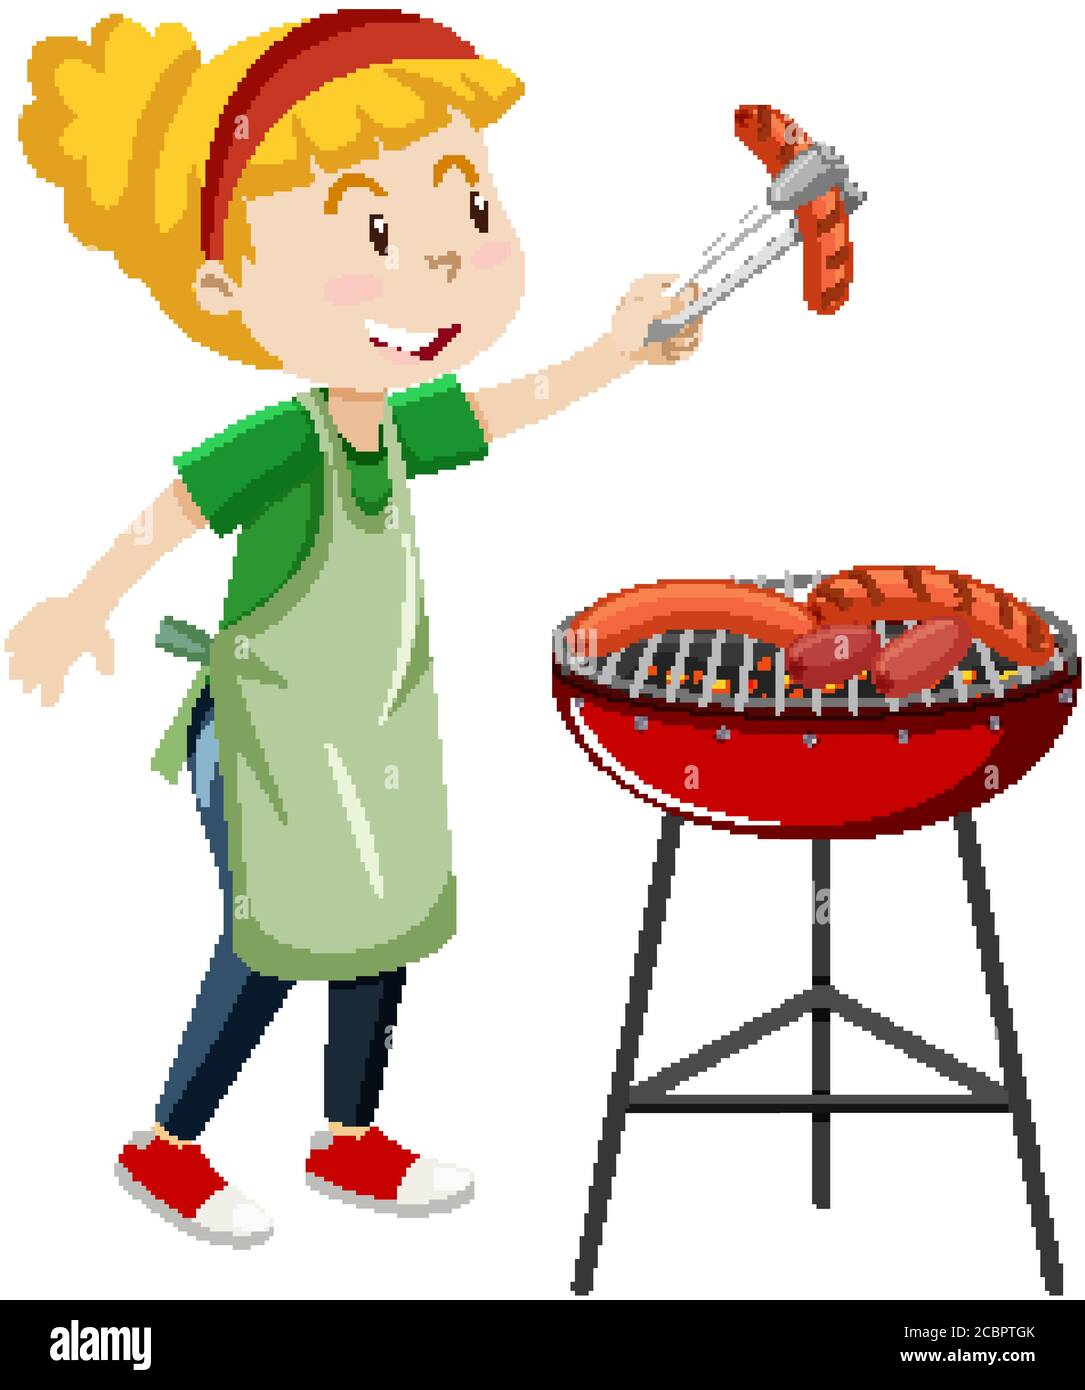 Barbeque Clipart Barbecue BBQ Clip Art Family Grill Grilling